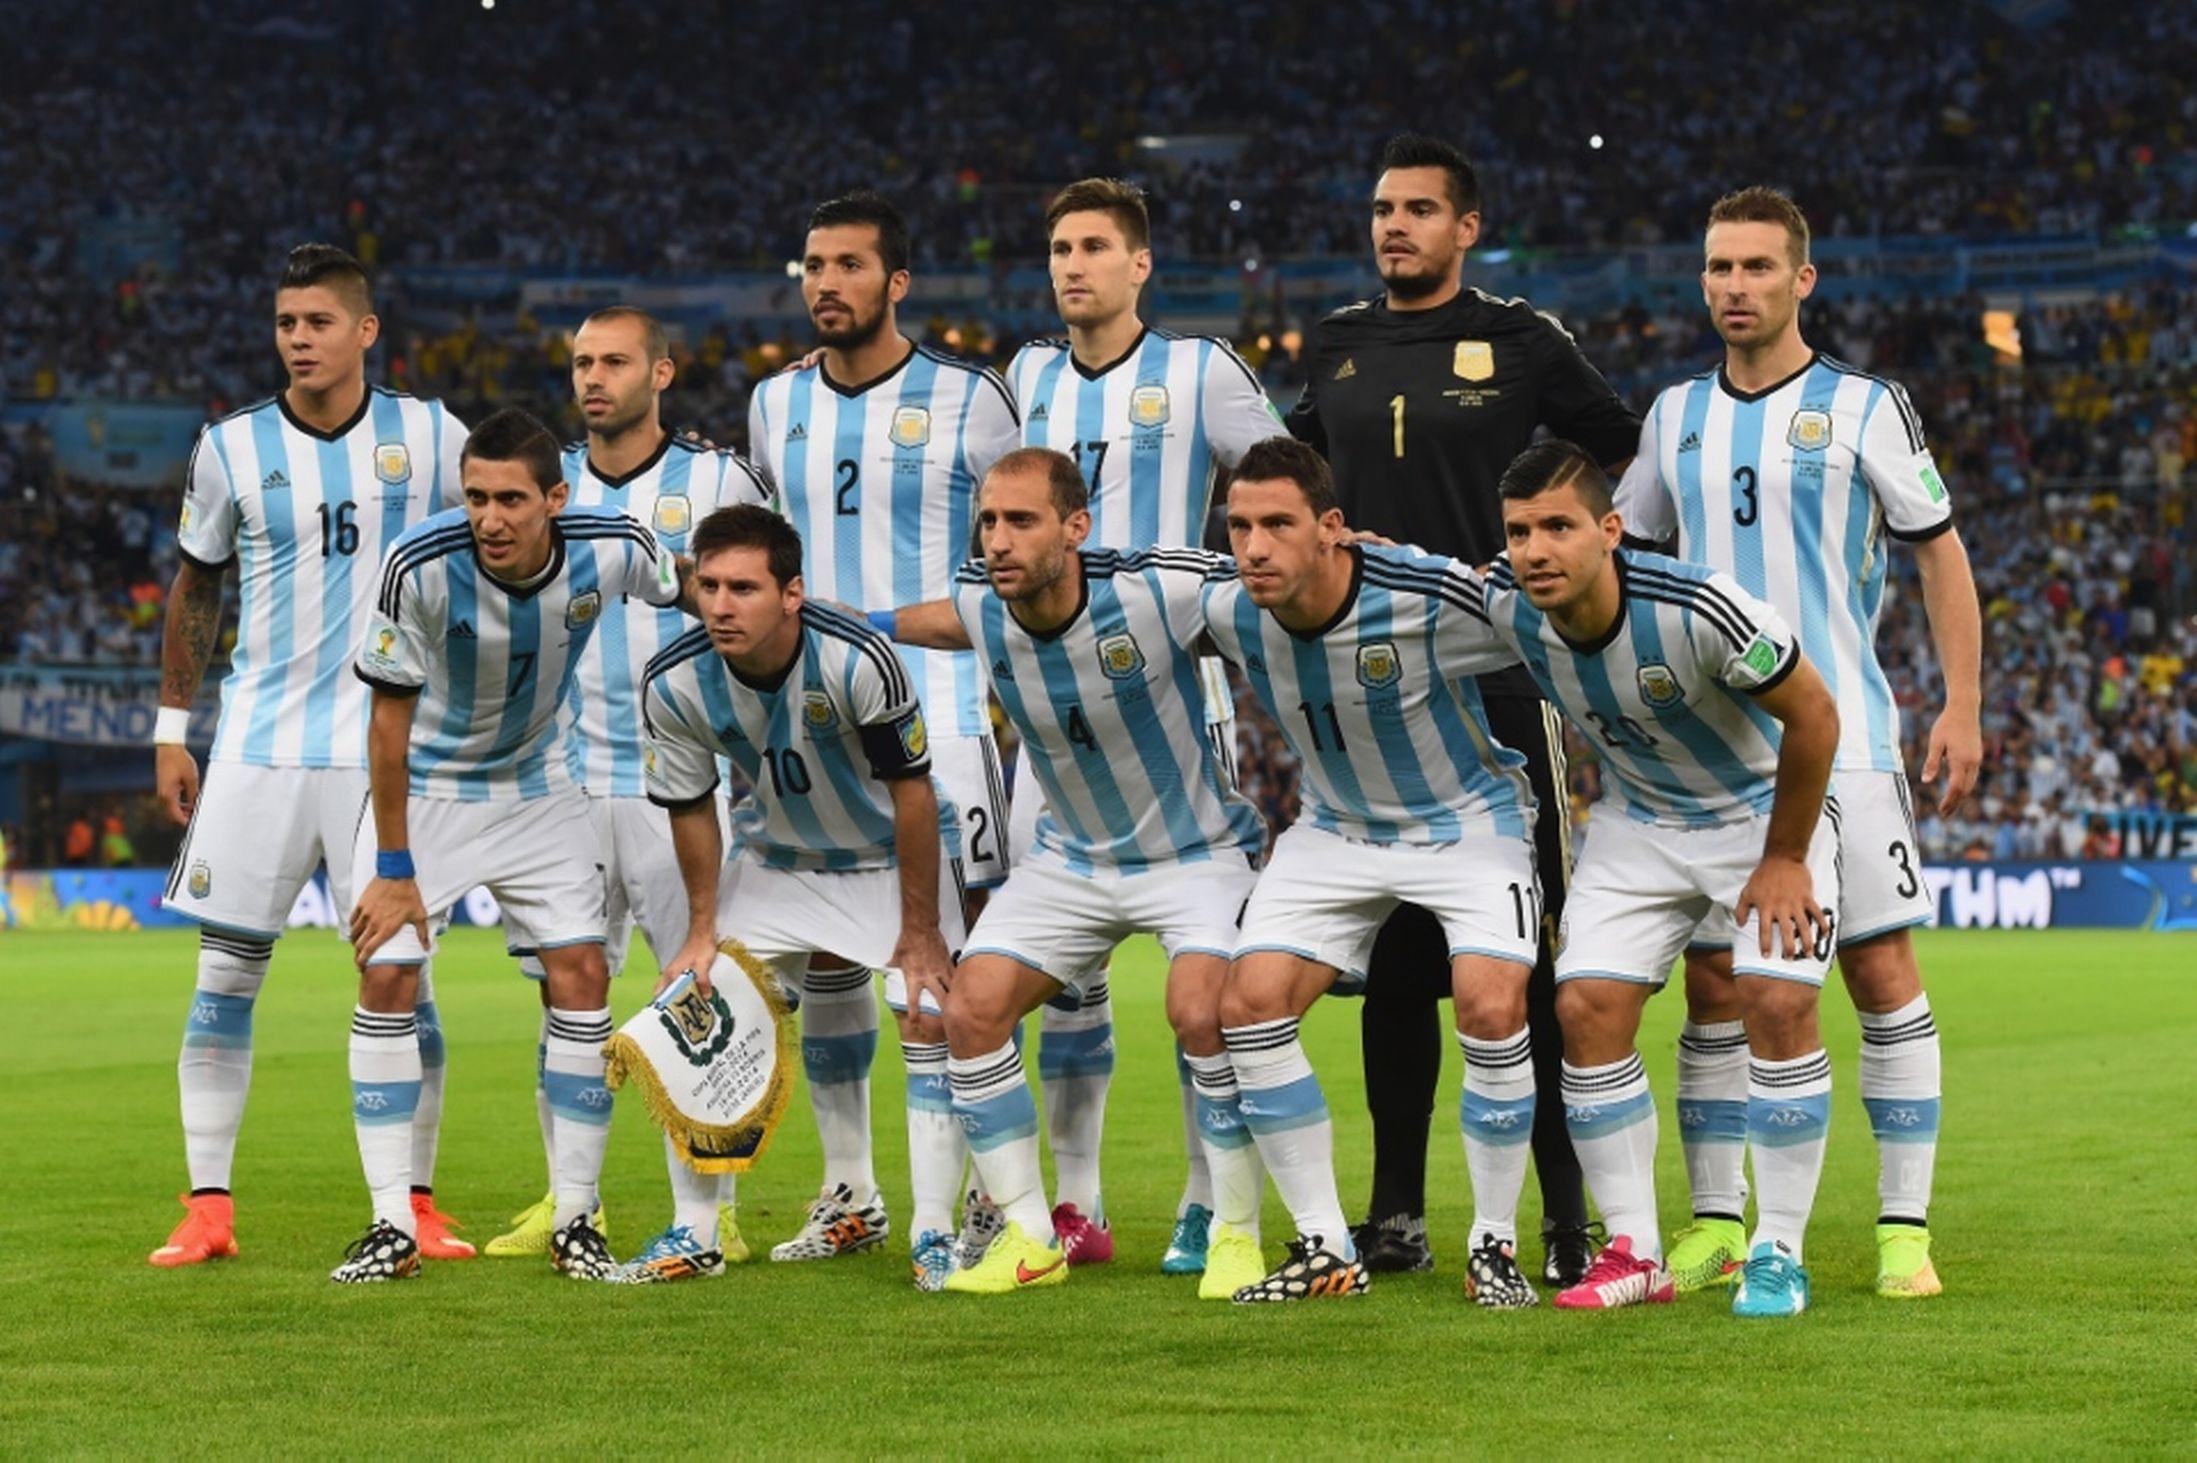 Argentina national football team Wallpaper and Background Image